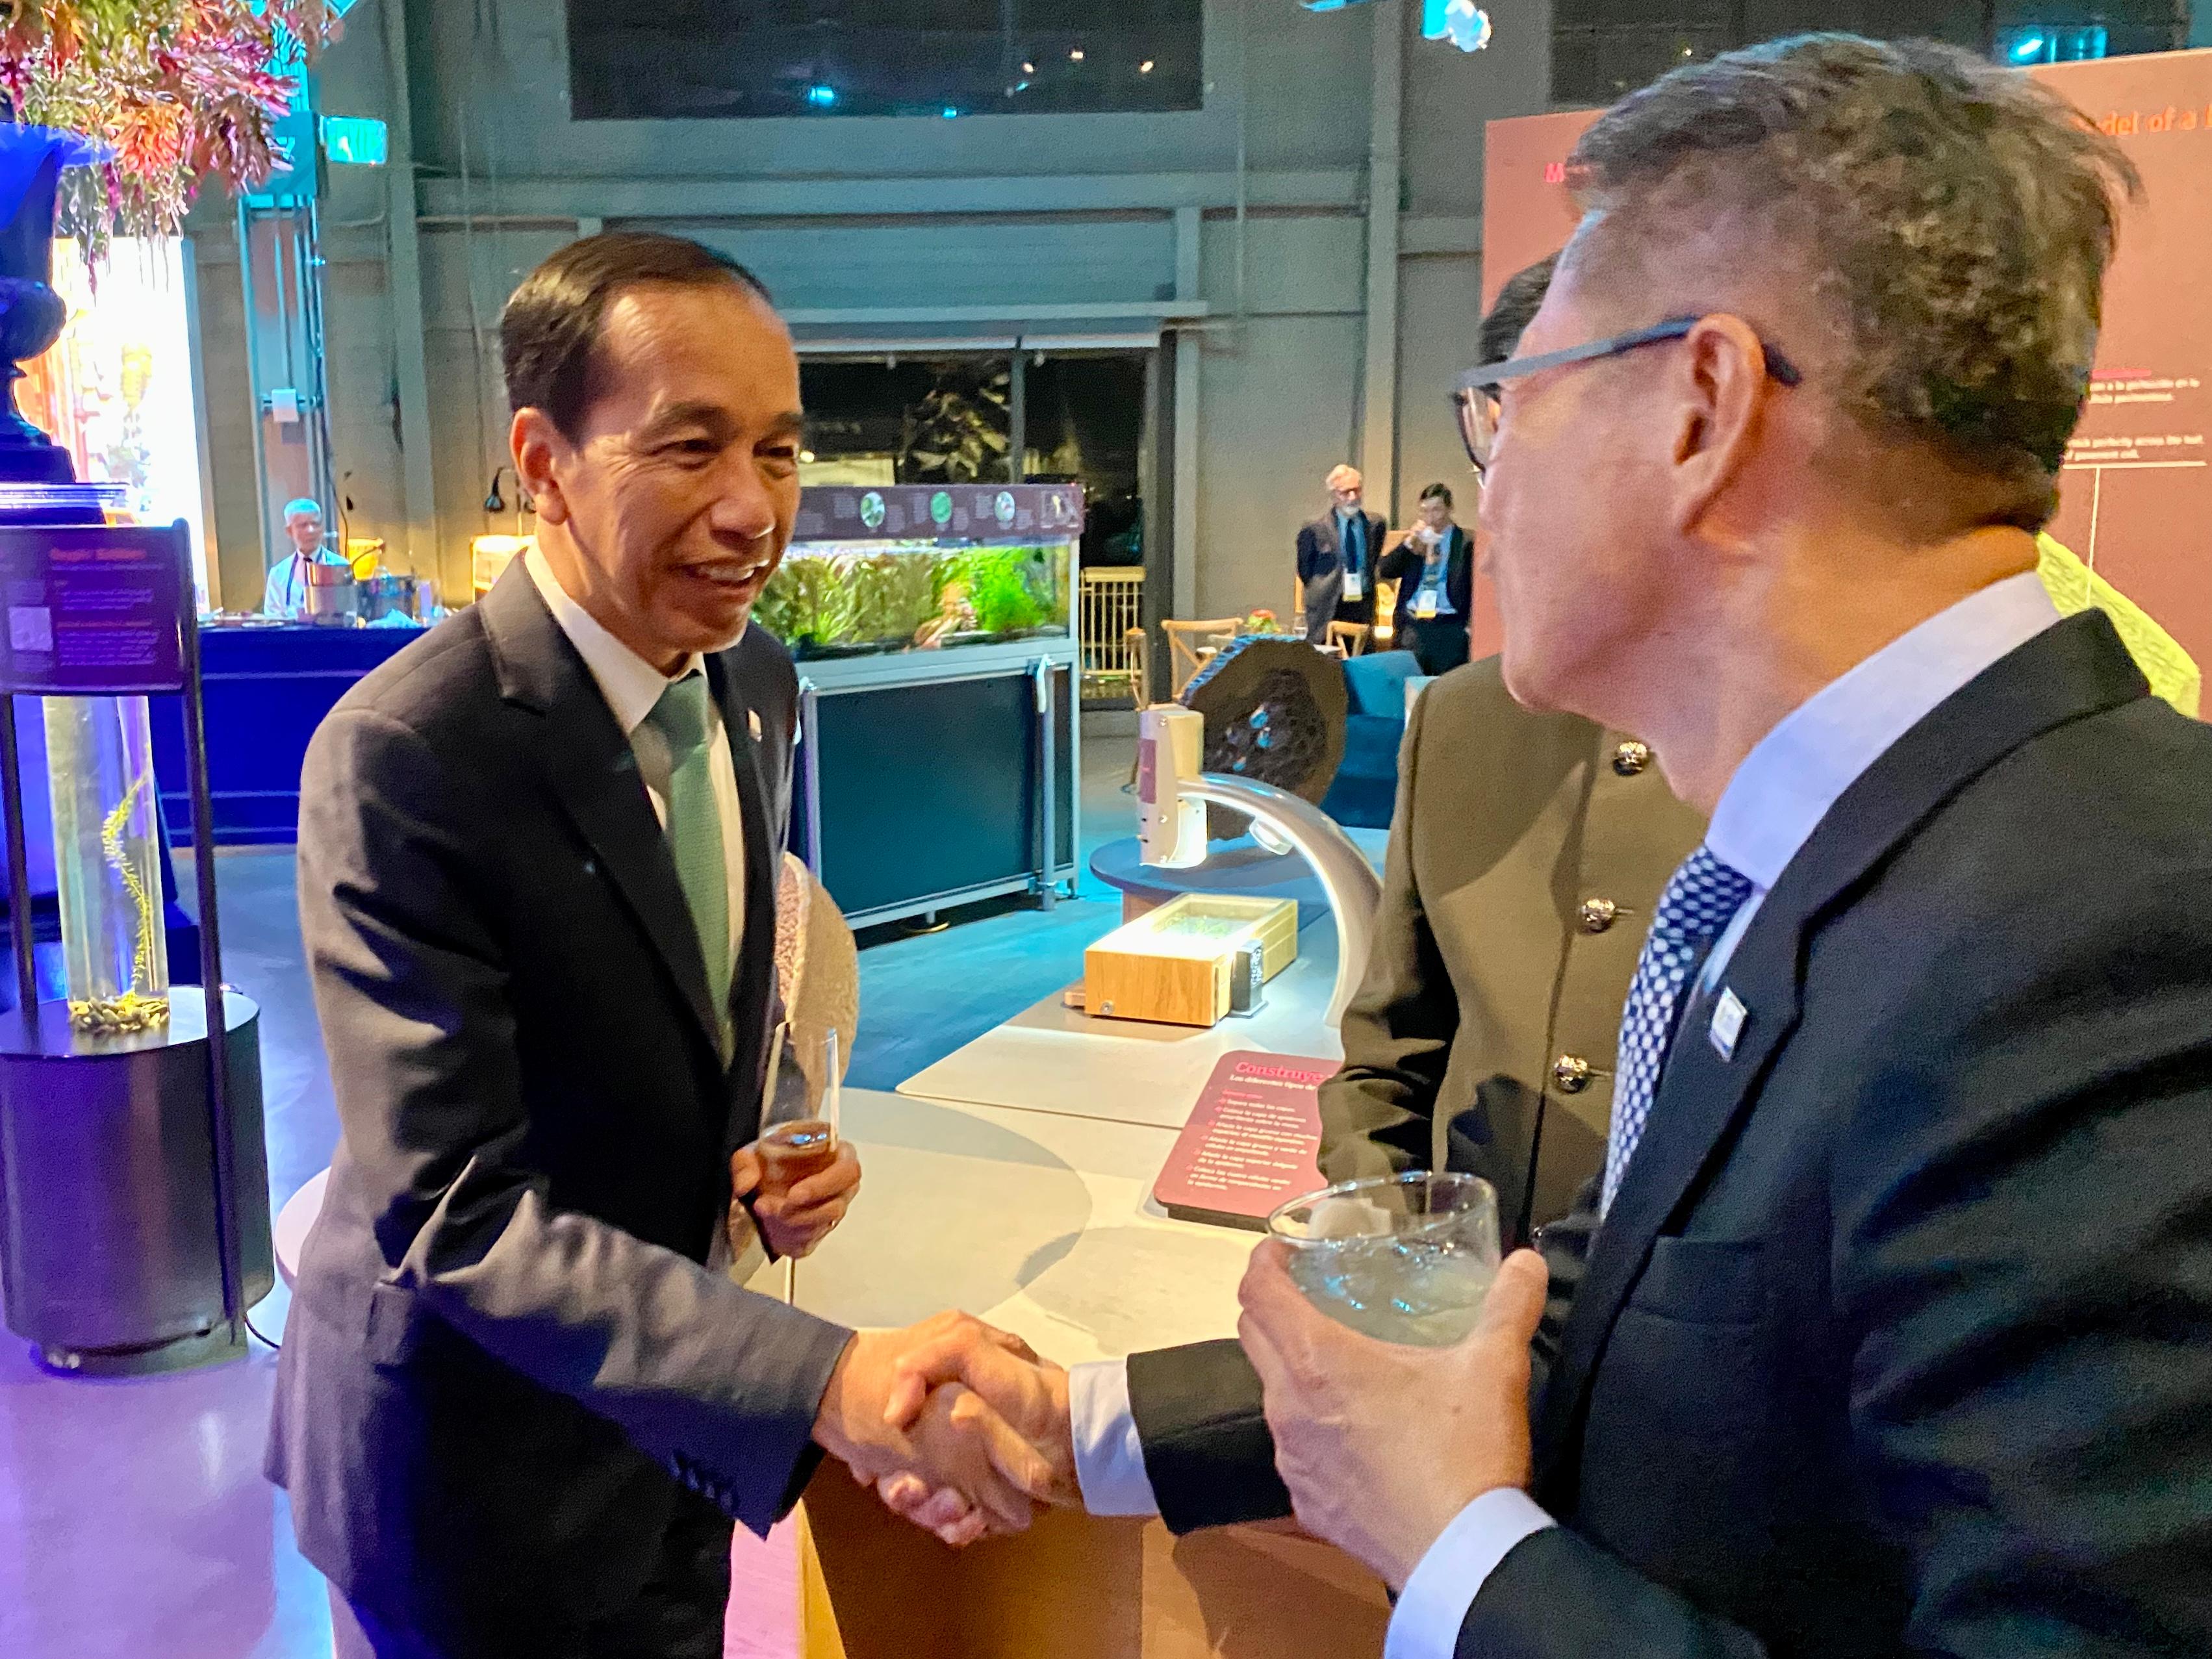 The Financial Secretary, Mr Paul Chan, attended the Asia-Pacific Economic Cooperation Economic Leaders' Meeting welcome reception and cultural performance in San Francisco, the United States, yesterday evening (November 15, San Francisco time). Photo shows Mr Chan (right) chatting with the President of Indonesia, Mr Joko Widodo (left) at the welcome reception. 